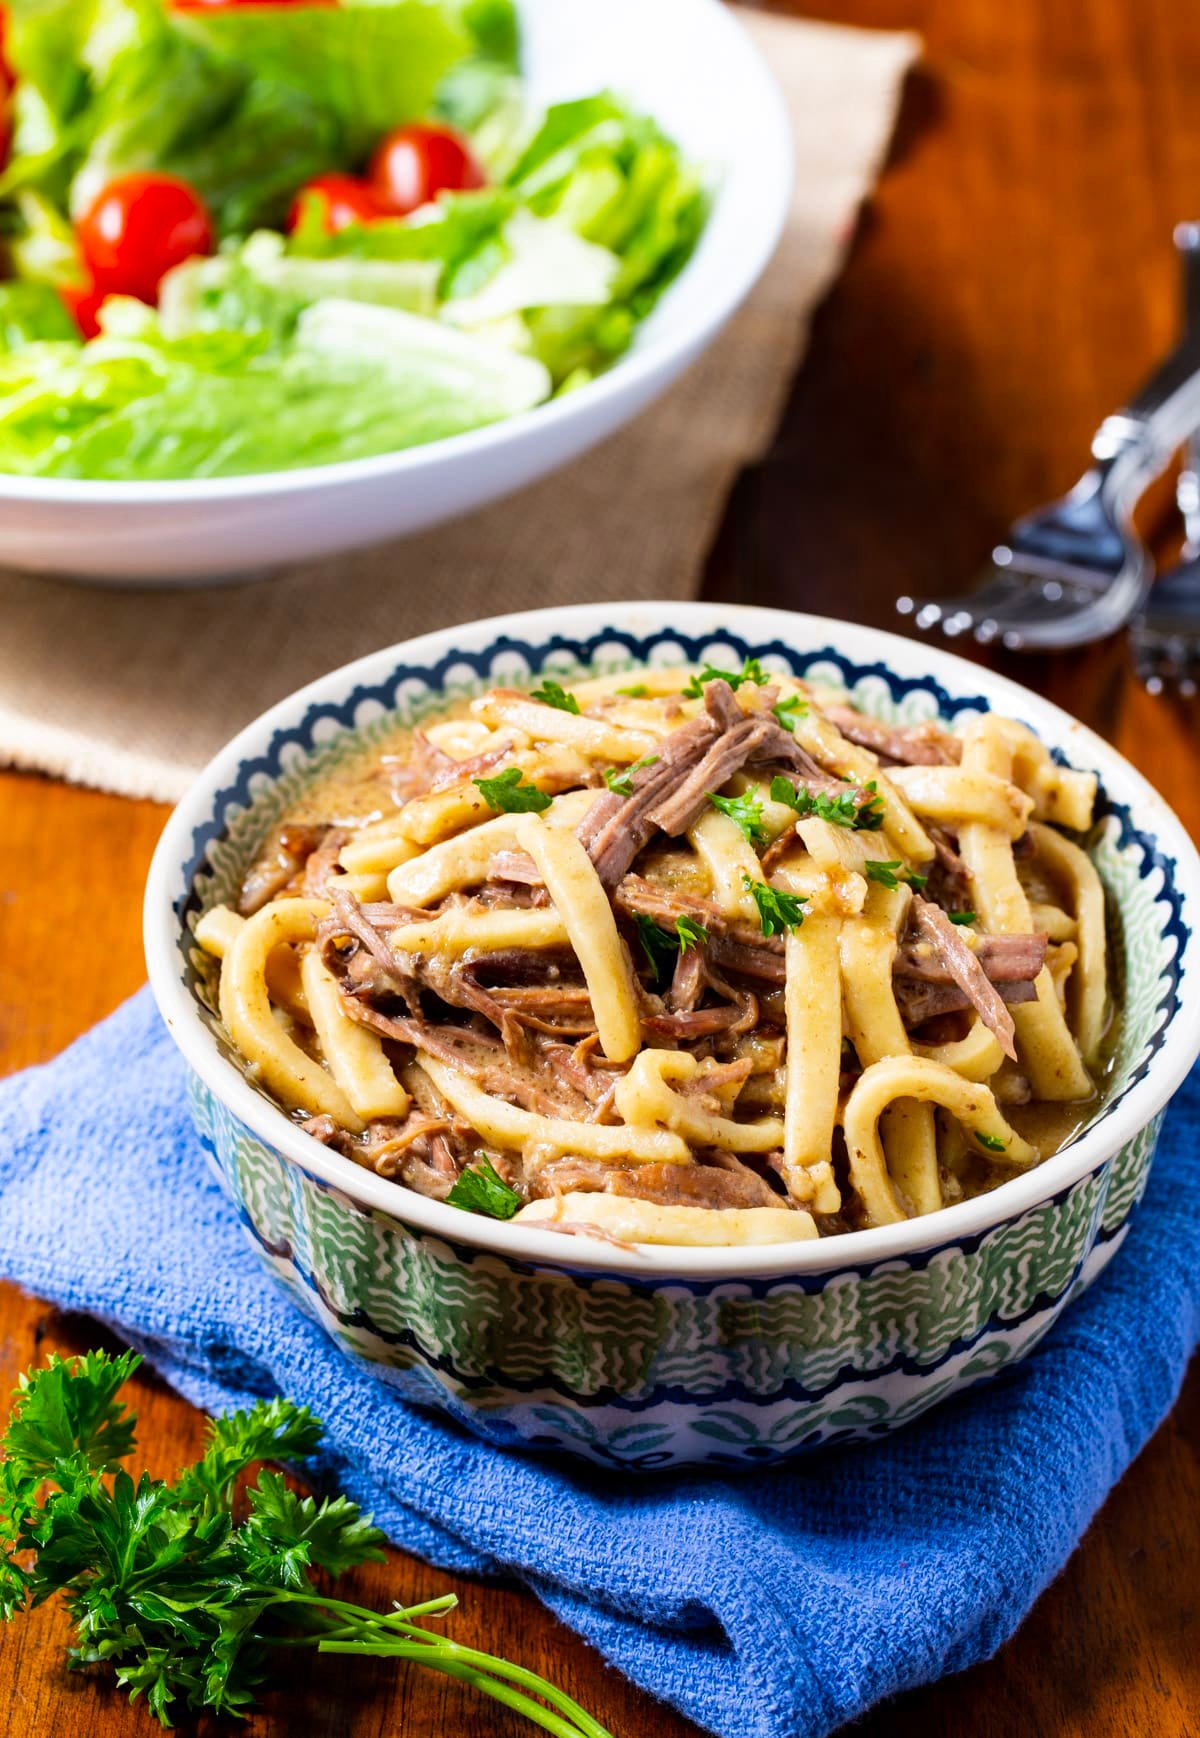 Beef and noodles in a bowl and a salad.